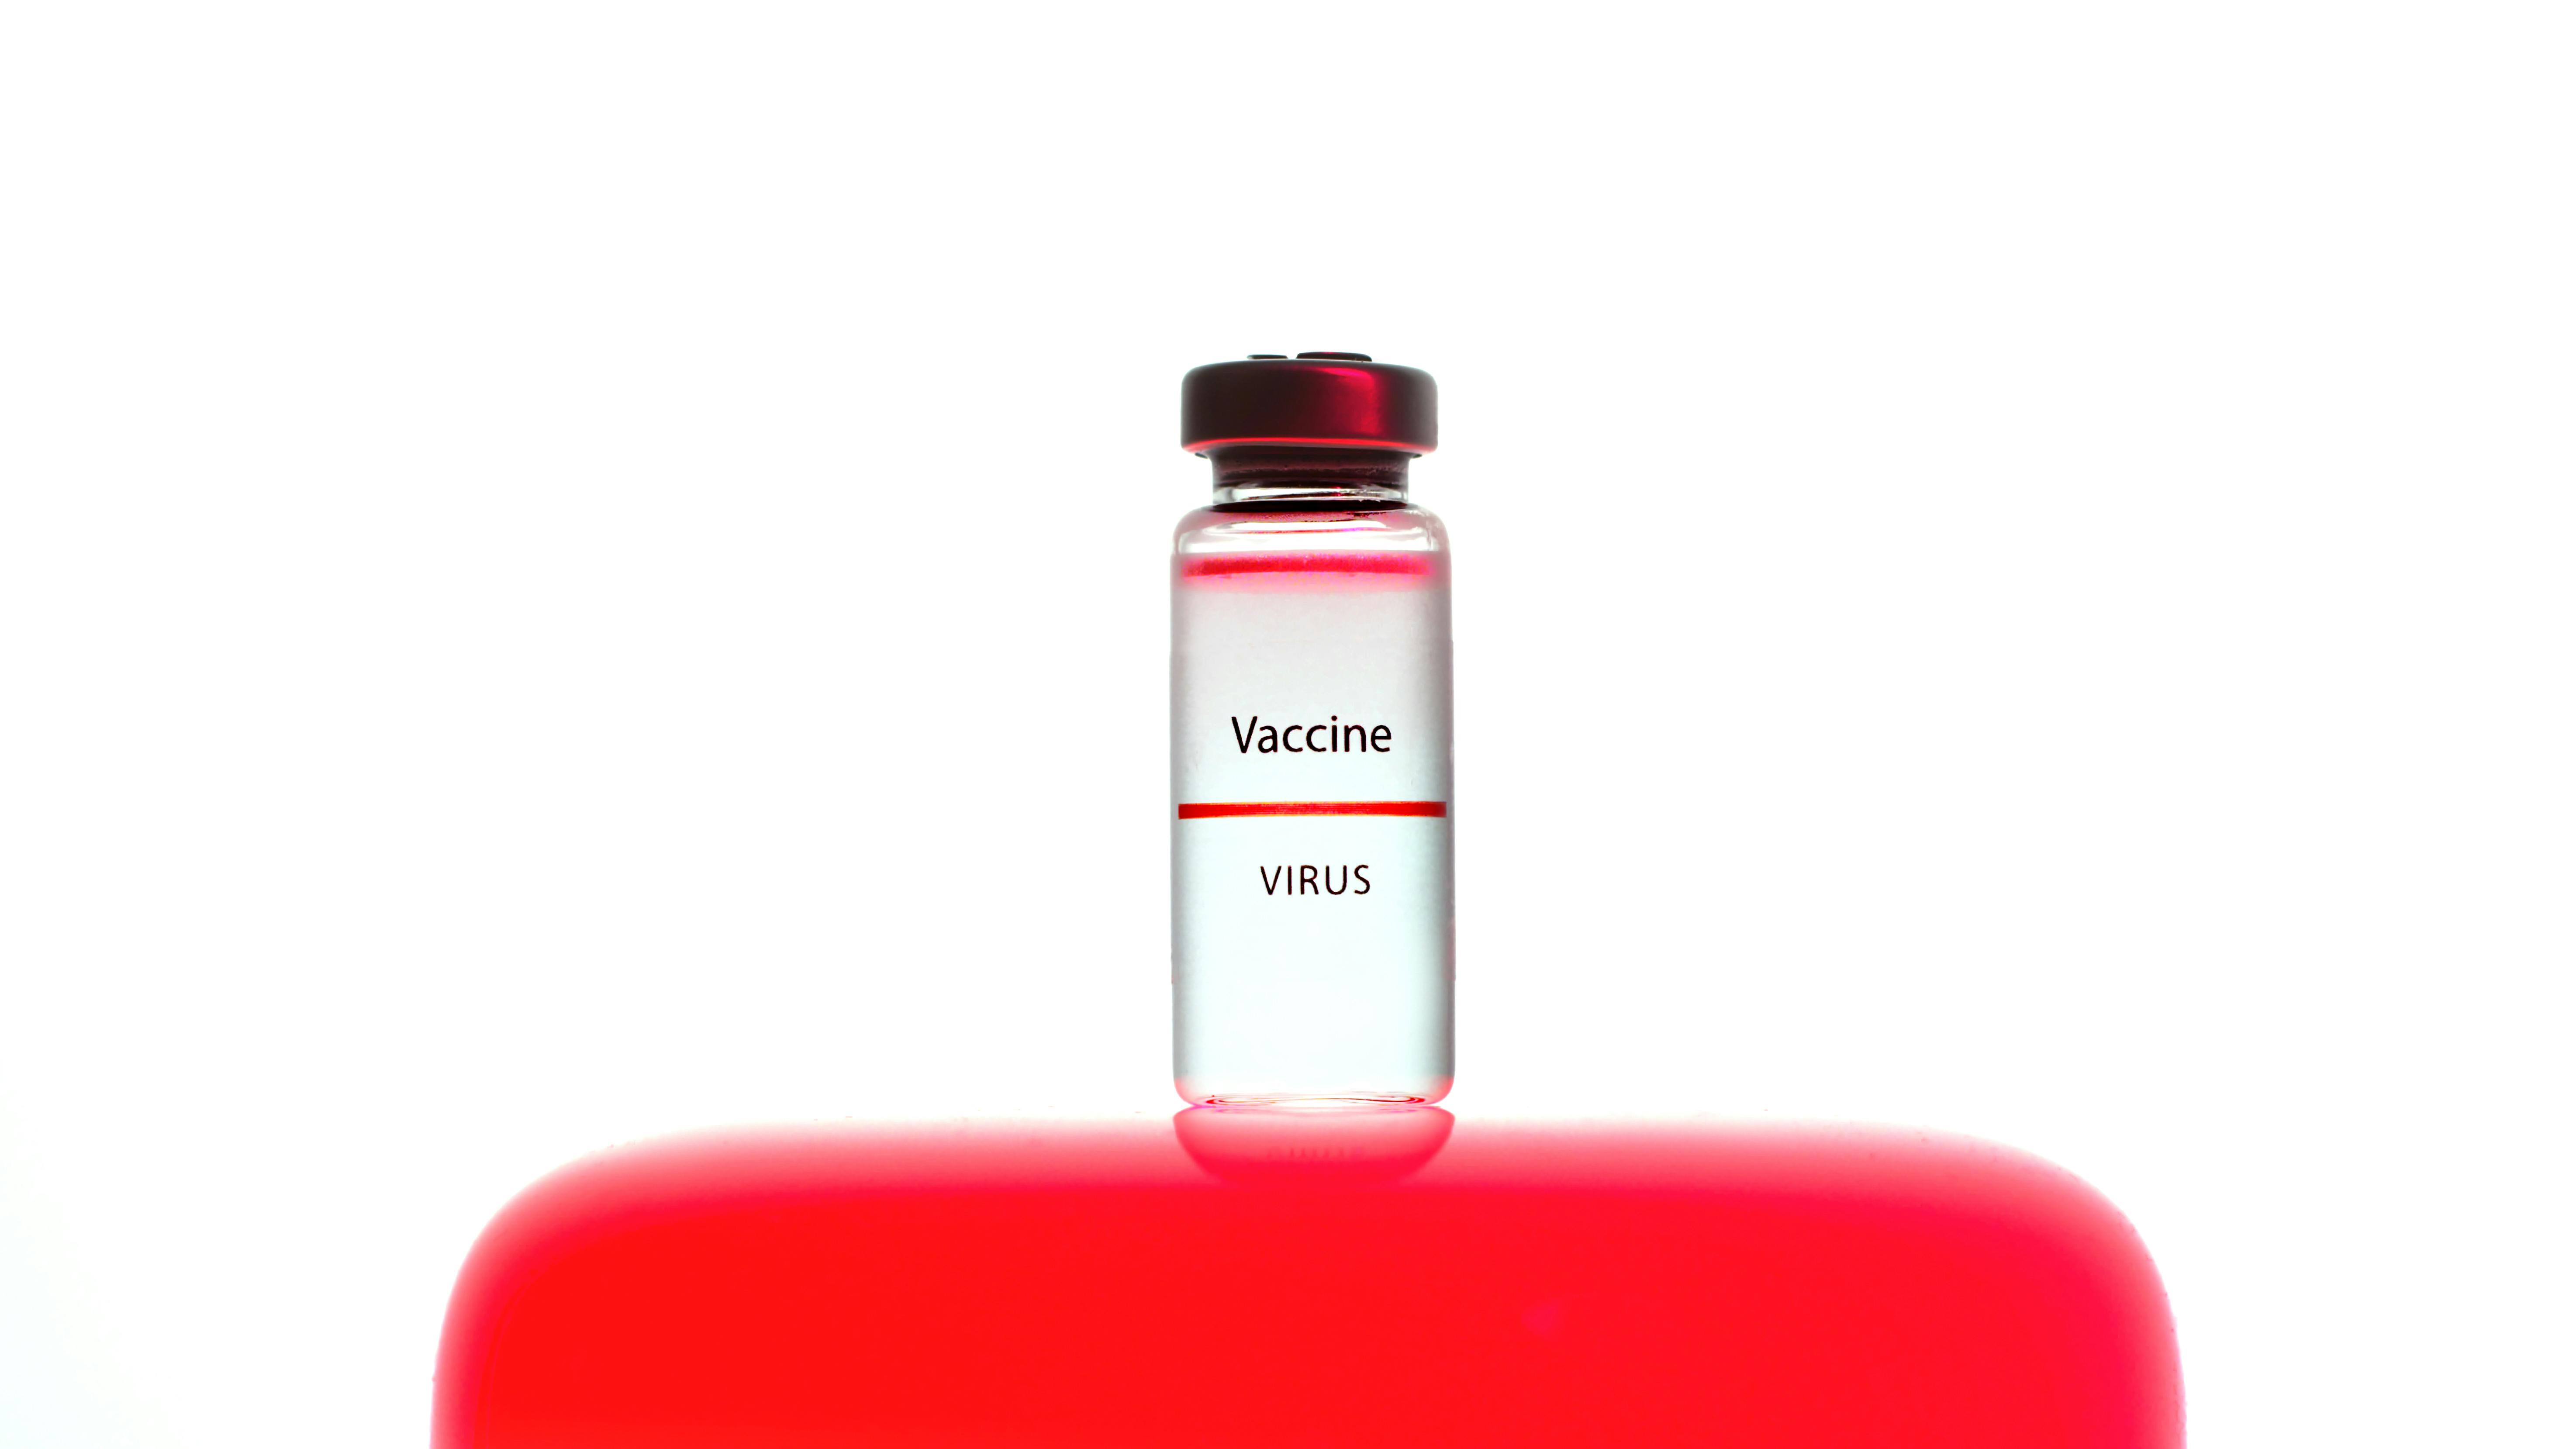 a close up view of a vaccine vial on white background